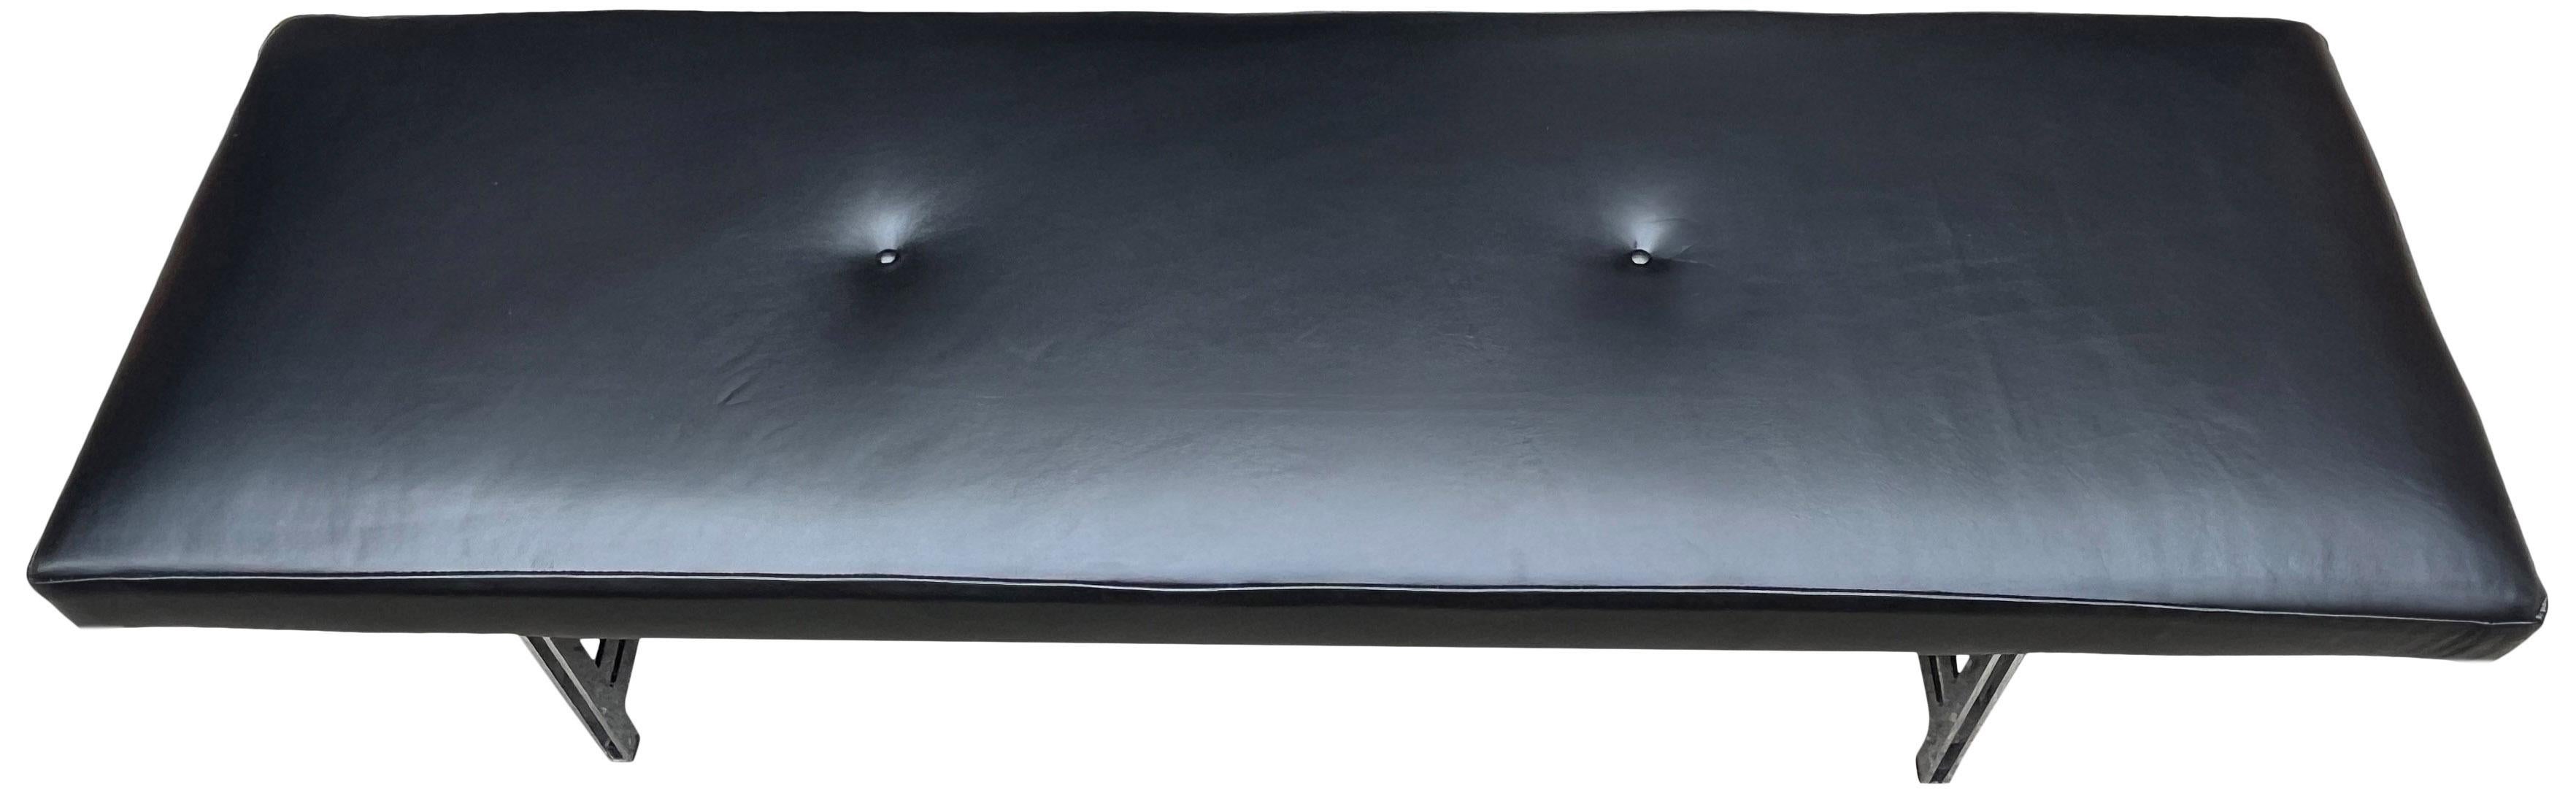 Walter Knoll Bench in Black Leather Crome Base  4